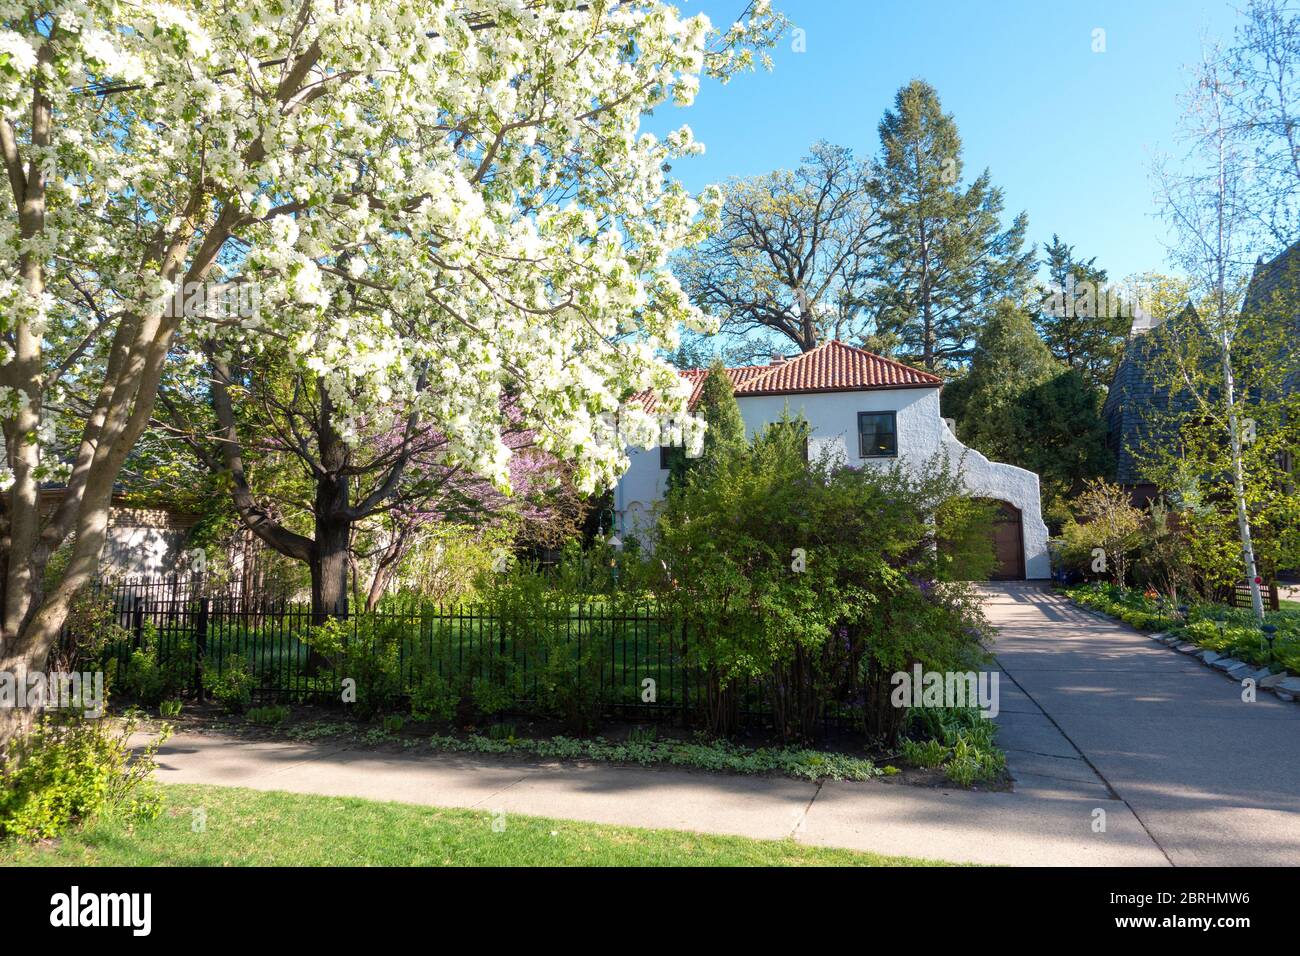 Beautiful home with red tile roof and apple tree filled with blossoms. St Paul Minnesota MN USA Stock Photo